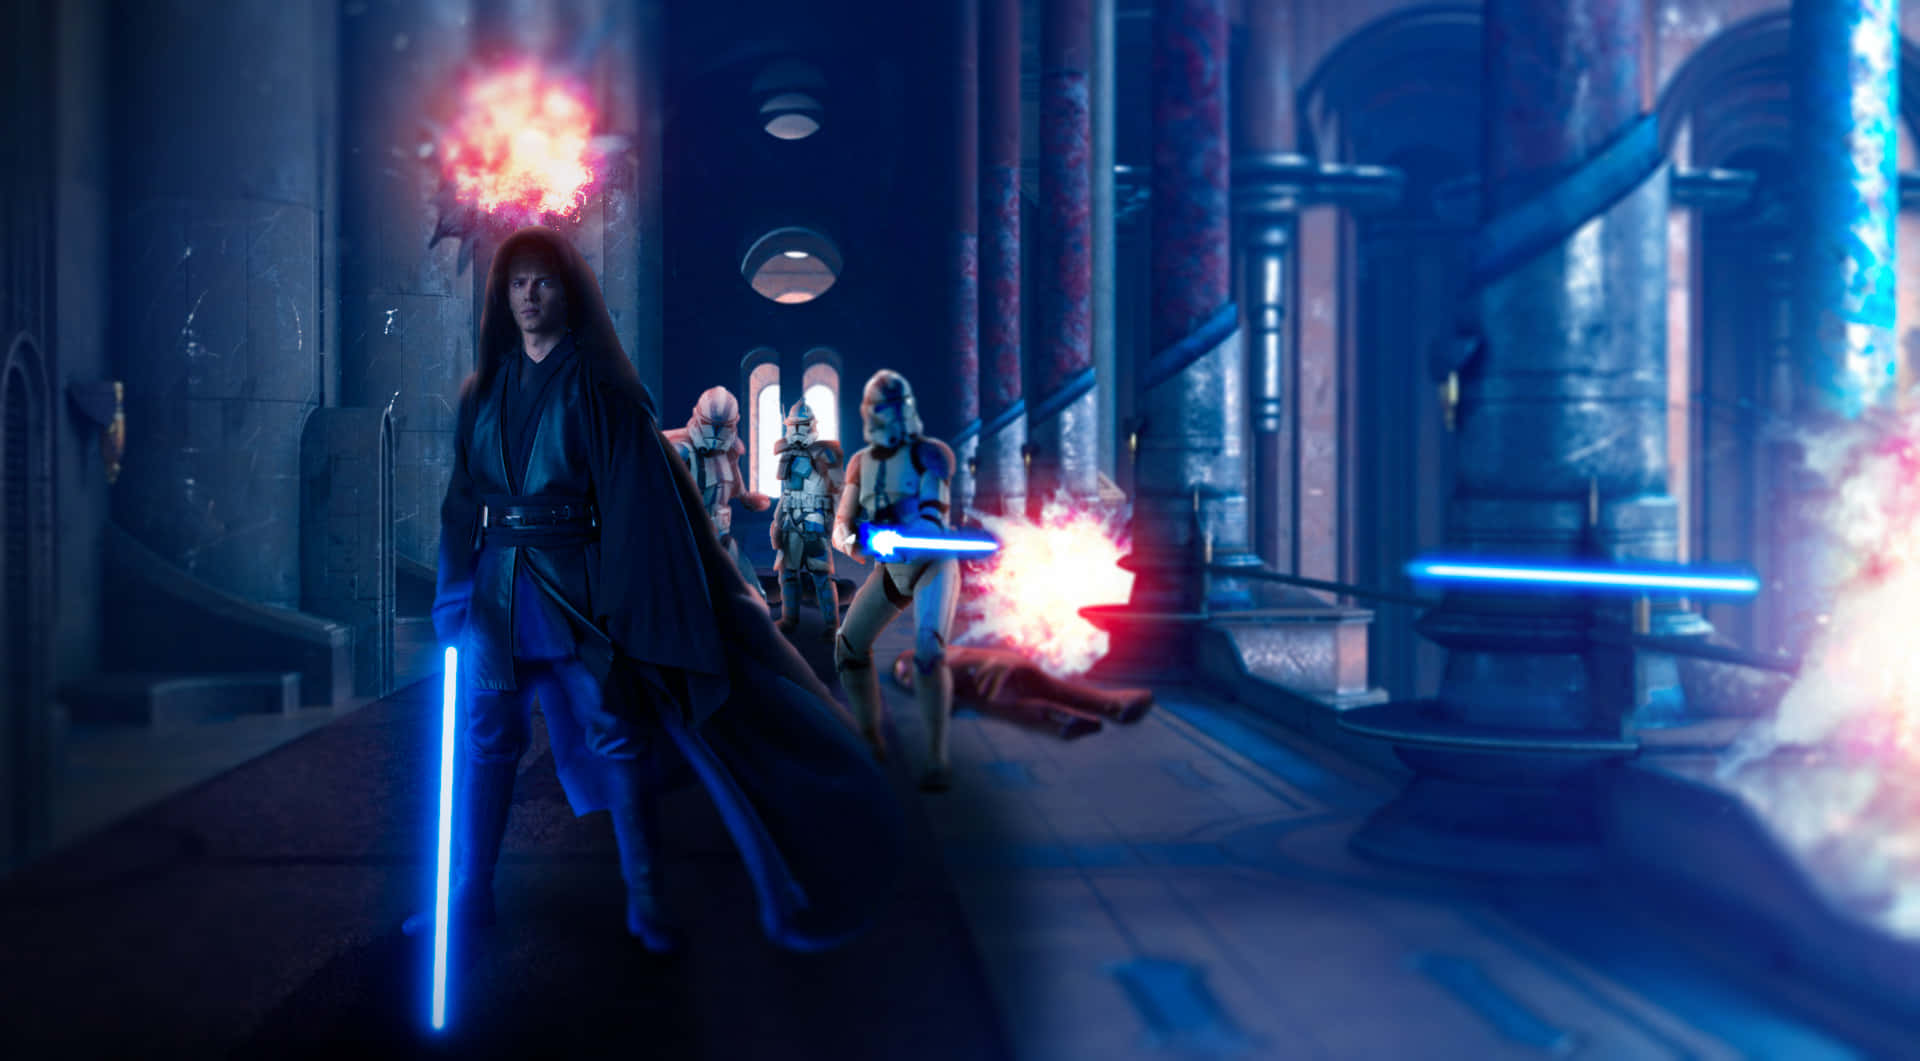 Members of the Jedi Council in discussion at their chamber Wallpaper